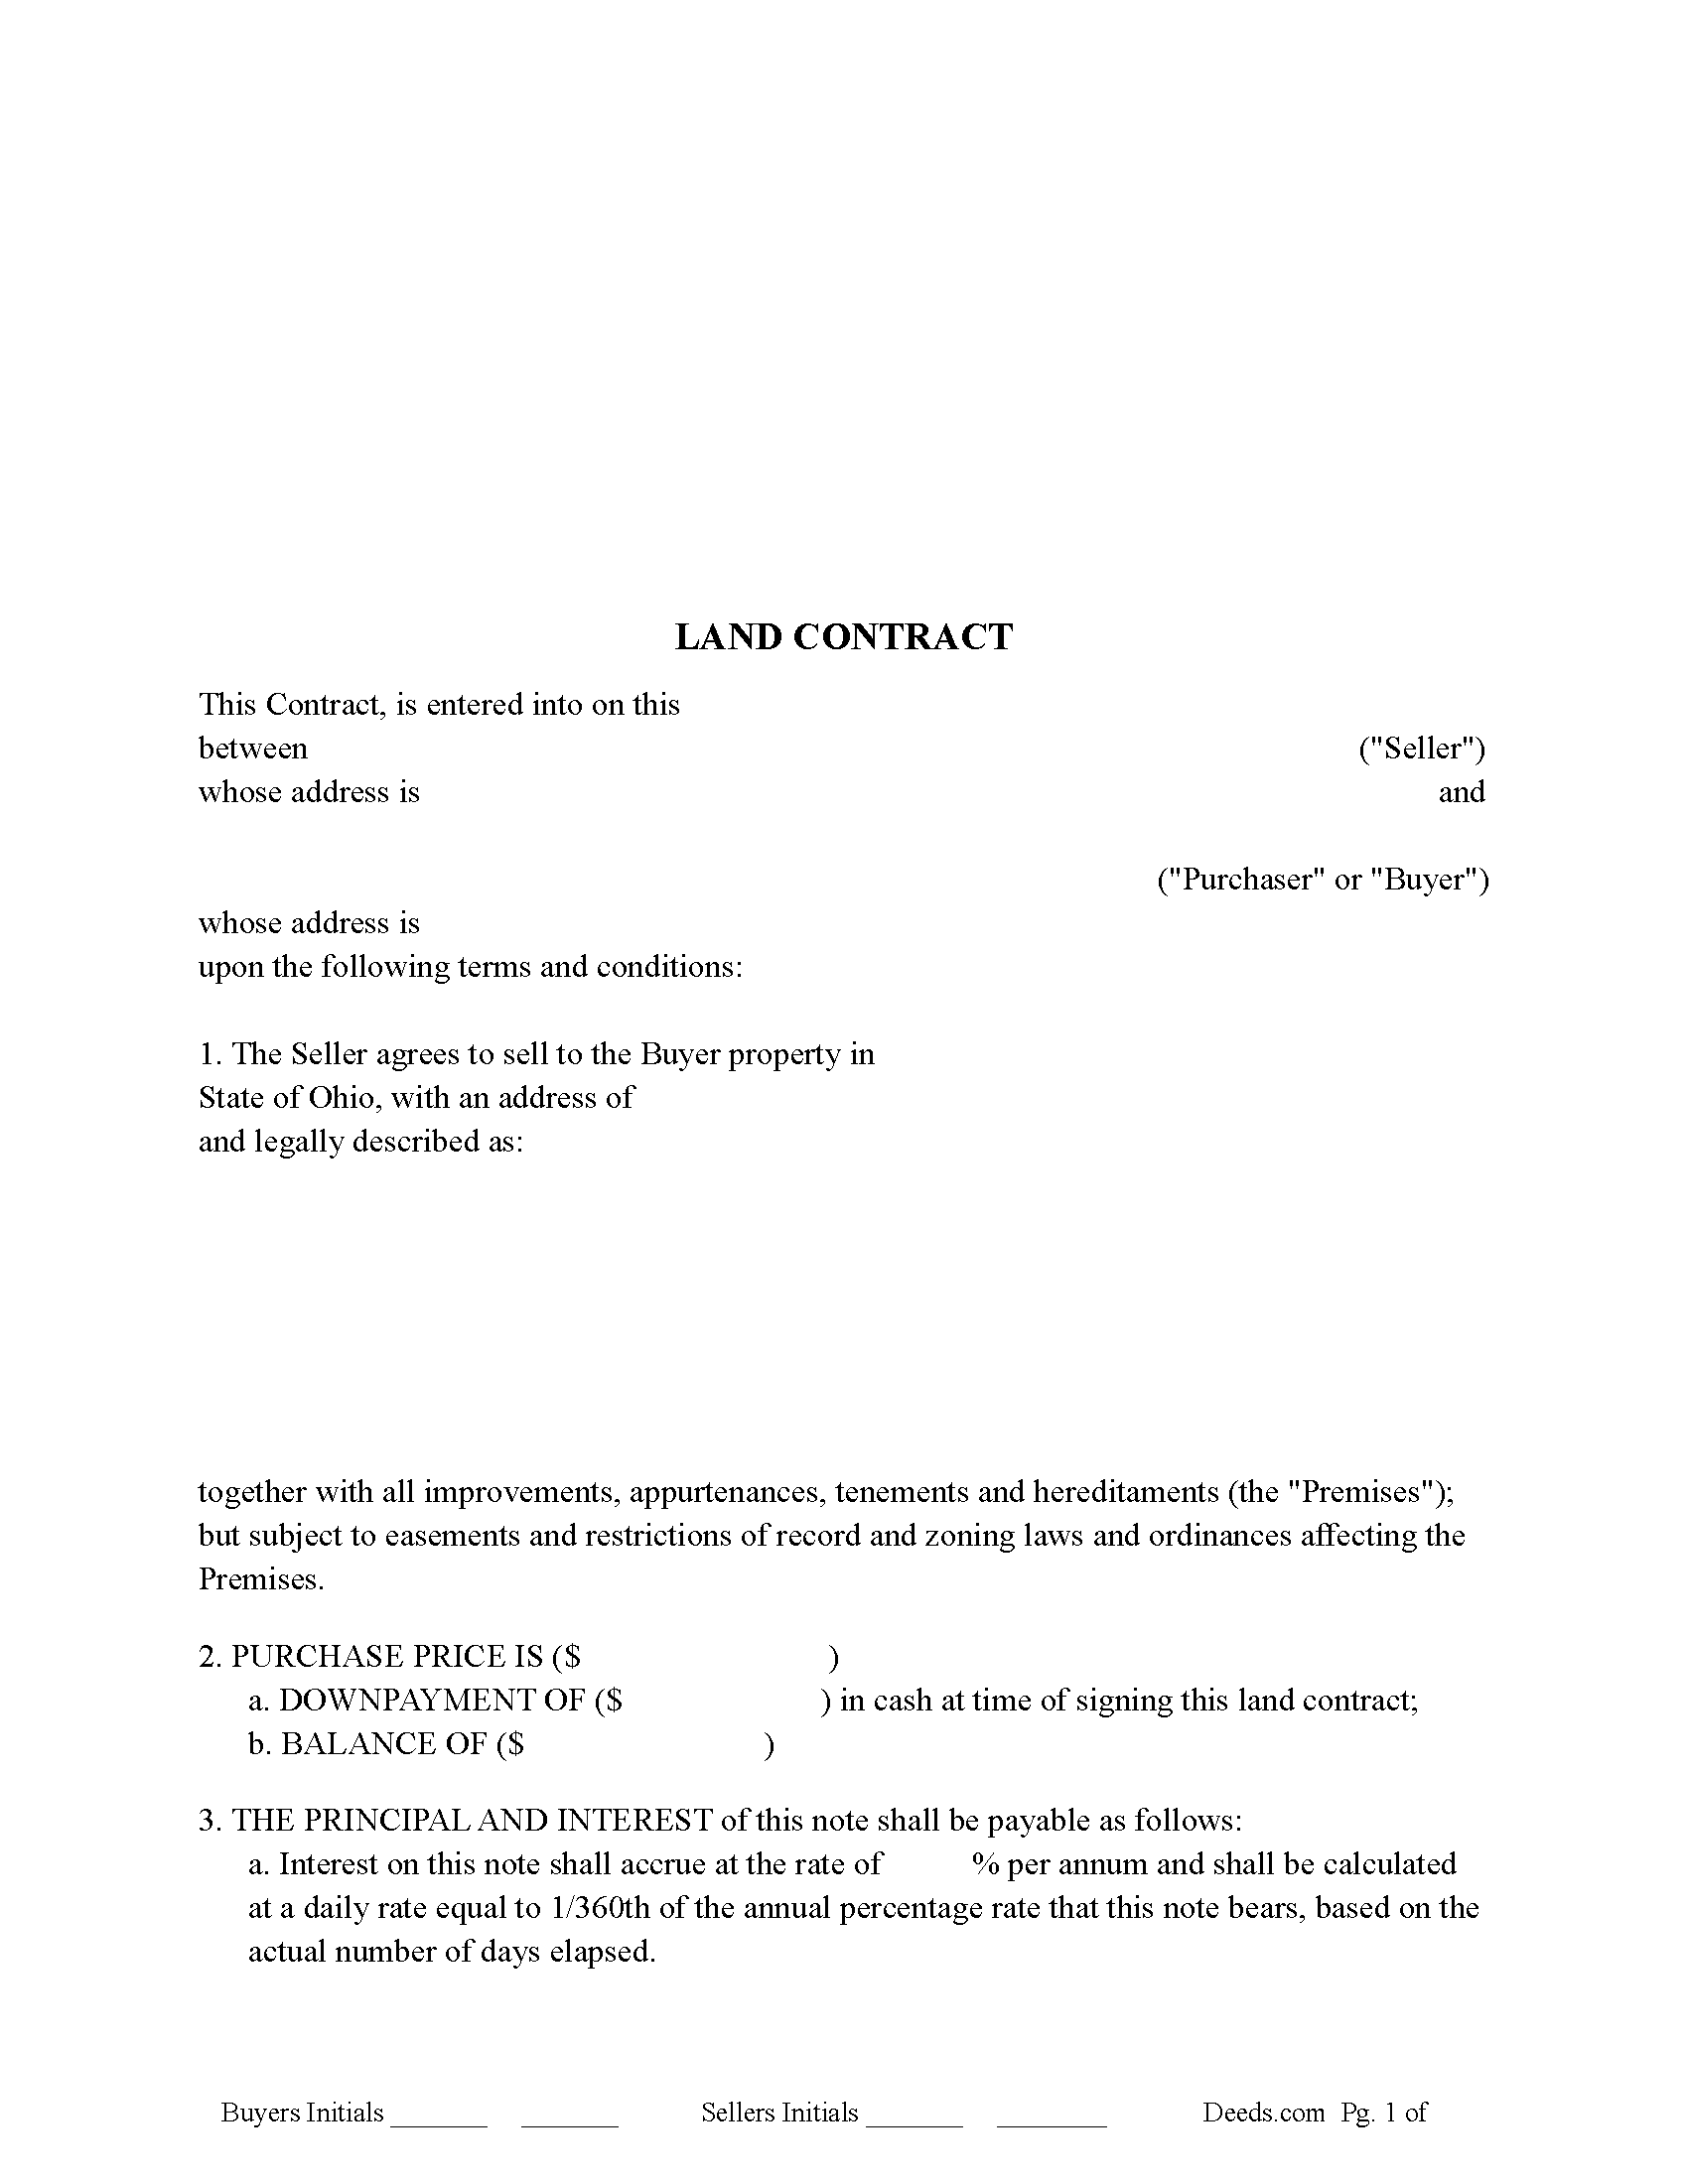 Noble County Land Contract Form